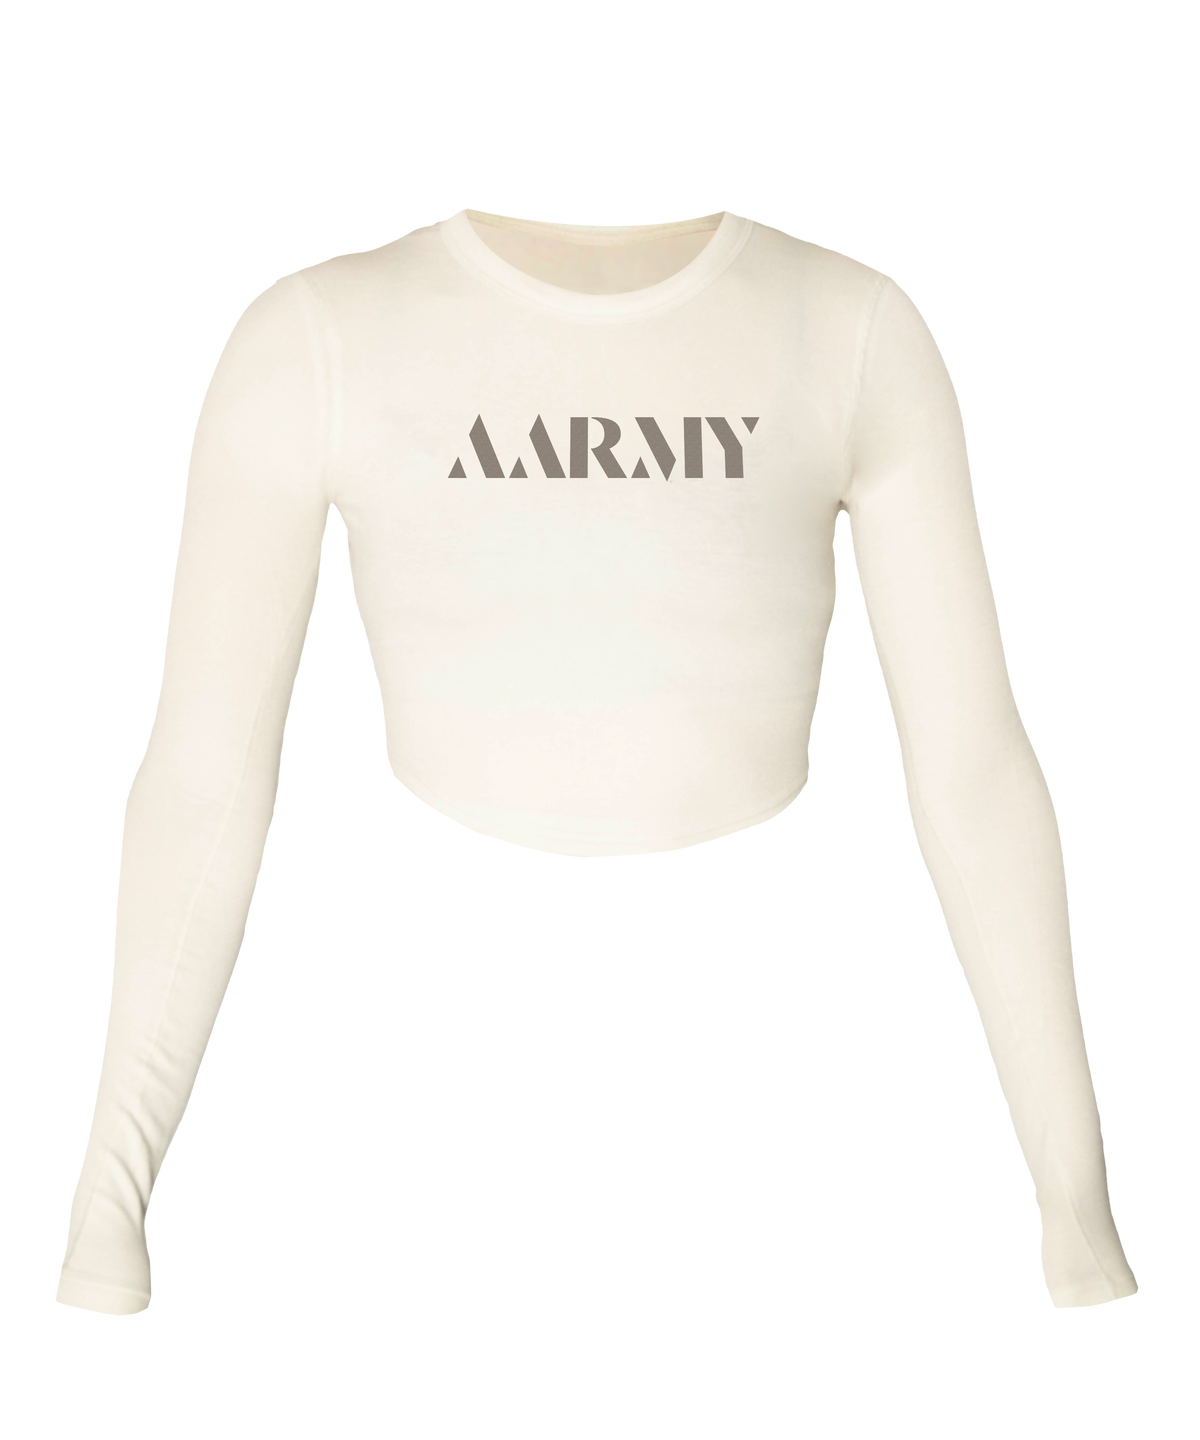 AARMY // lululemon Hold Tight Cropped LS